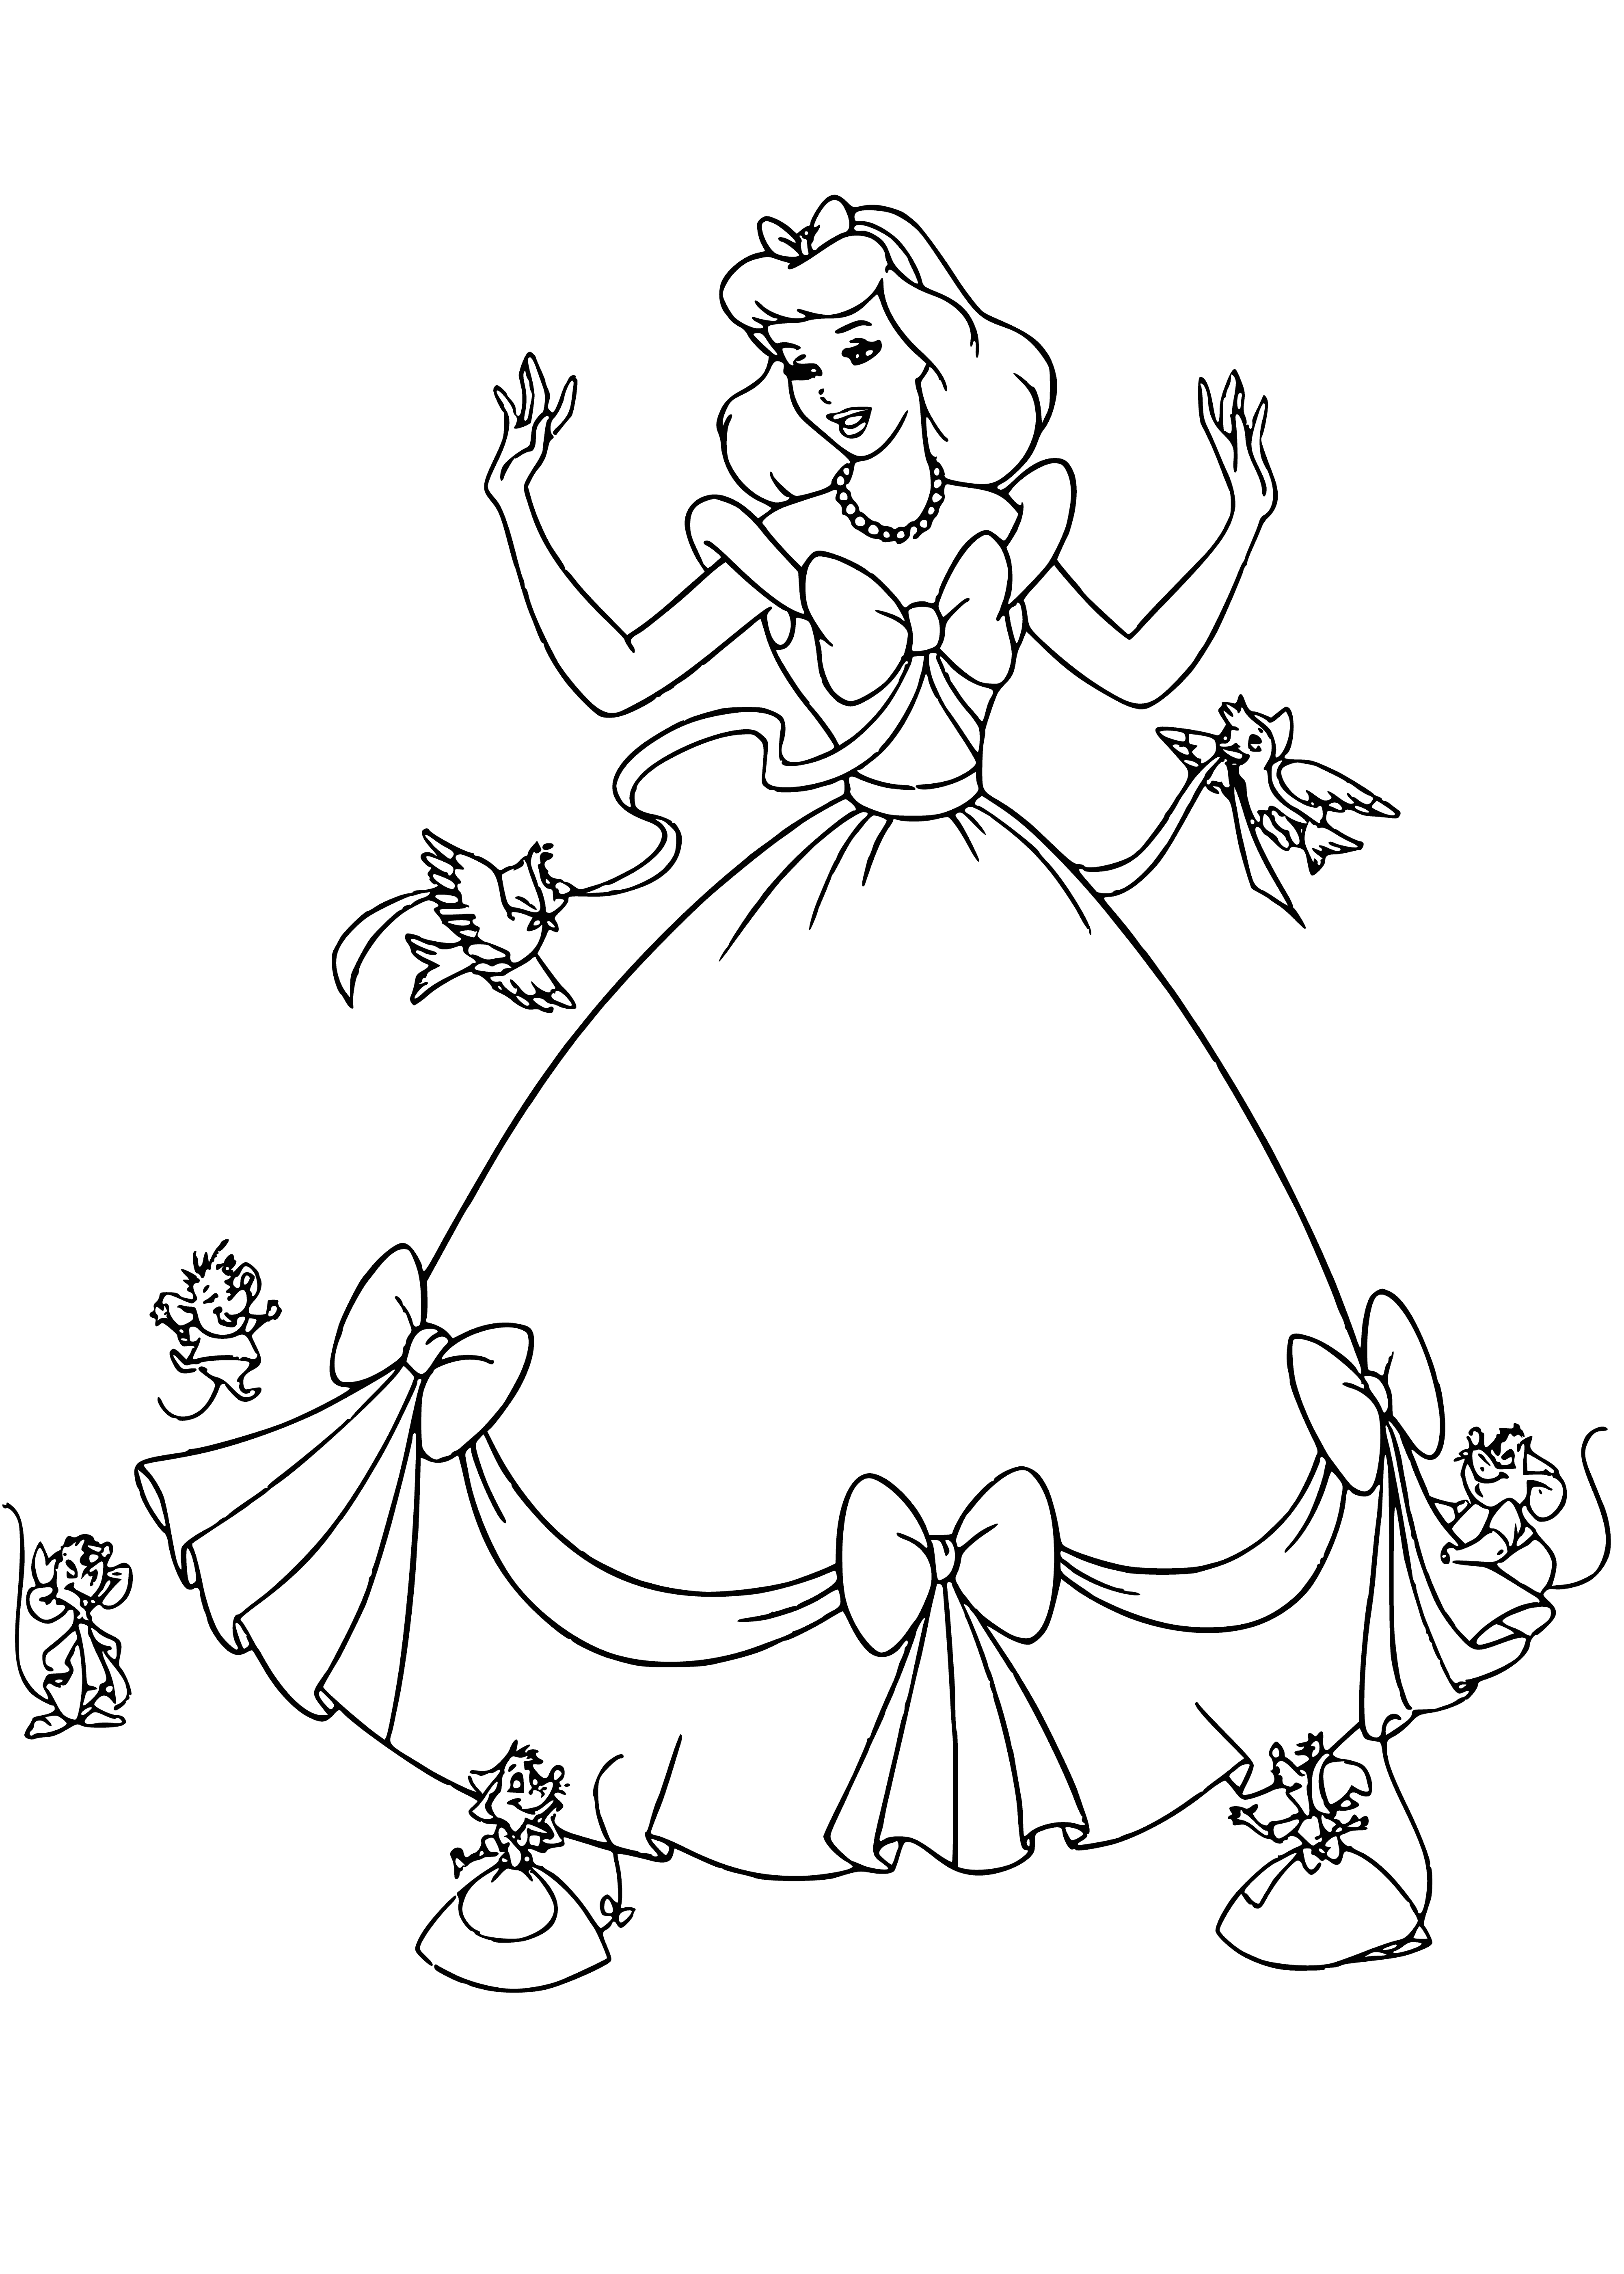 Cinderella in a beautiful dress coloring page